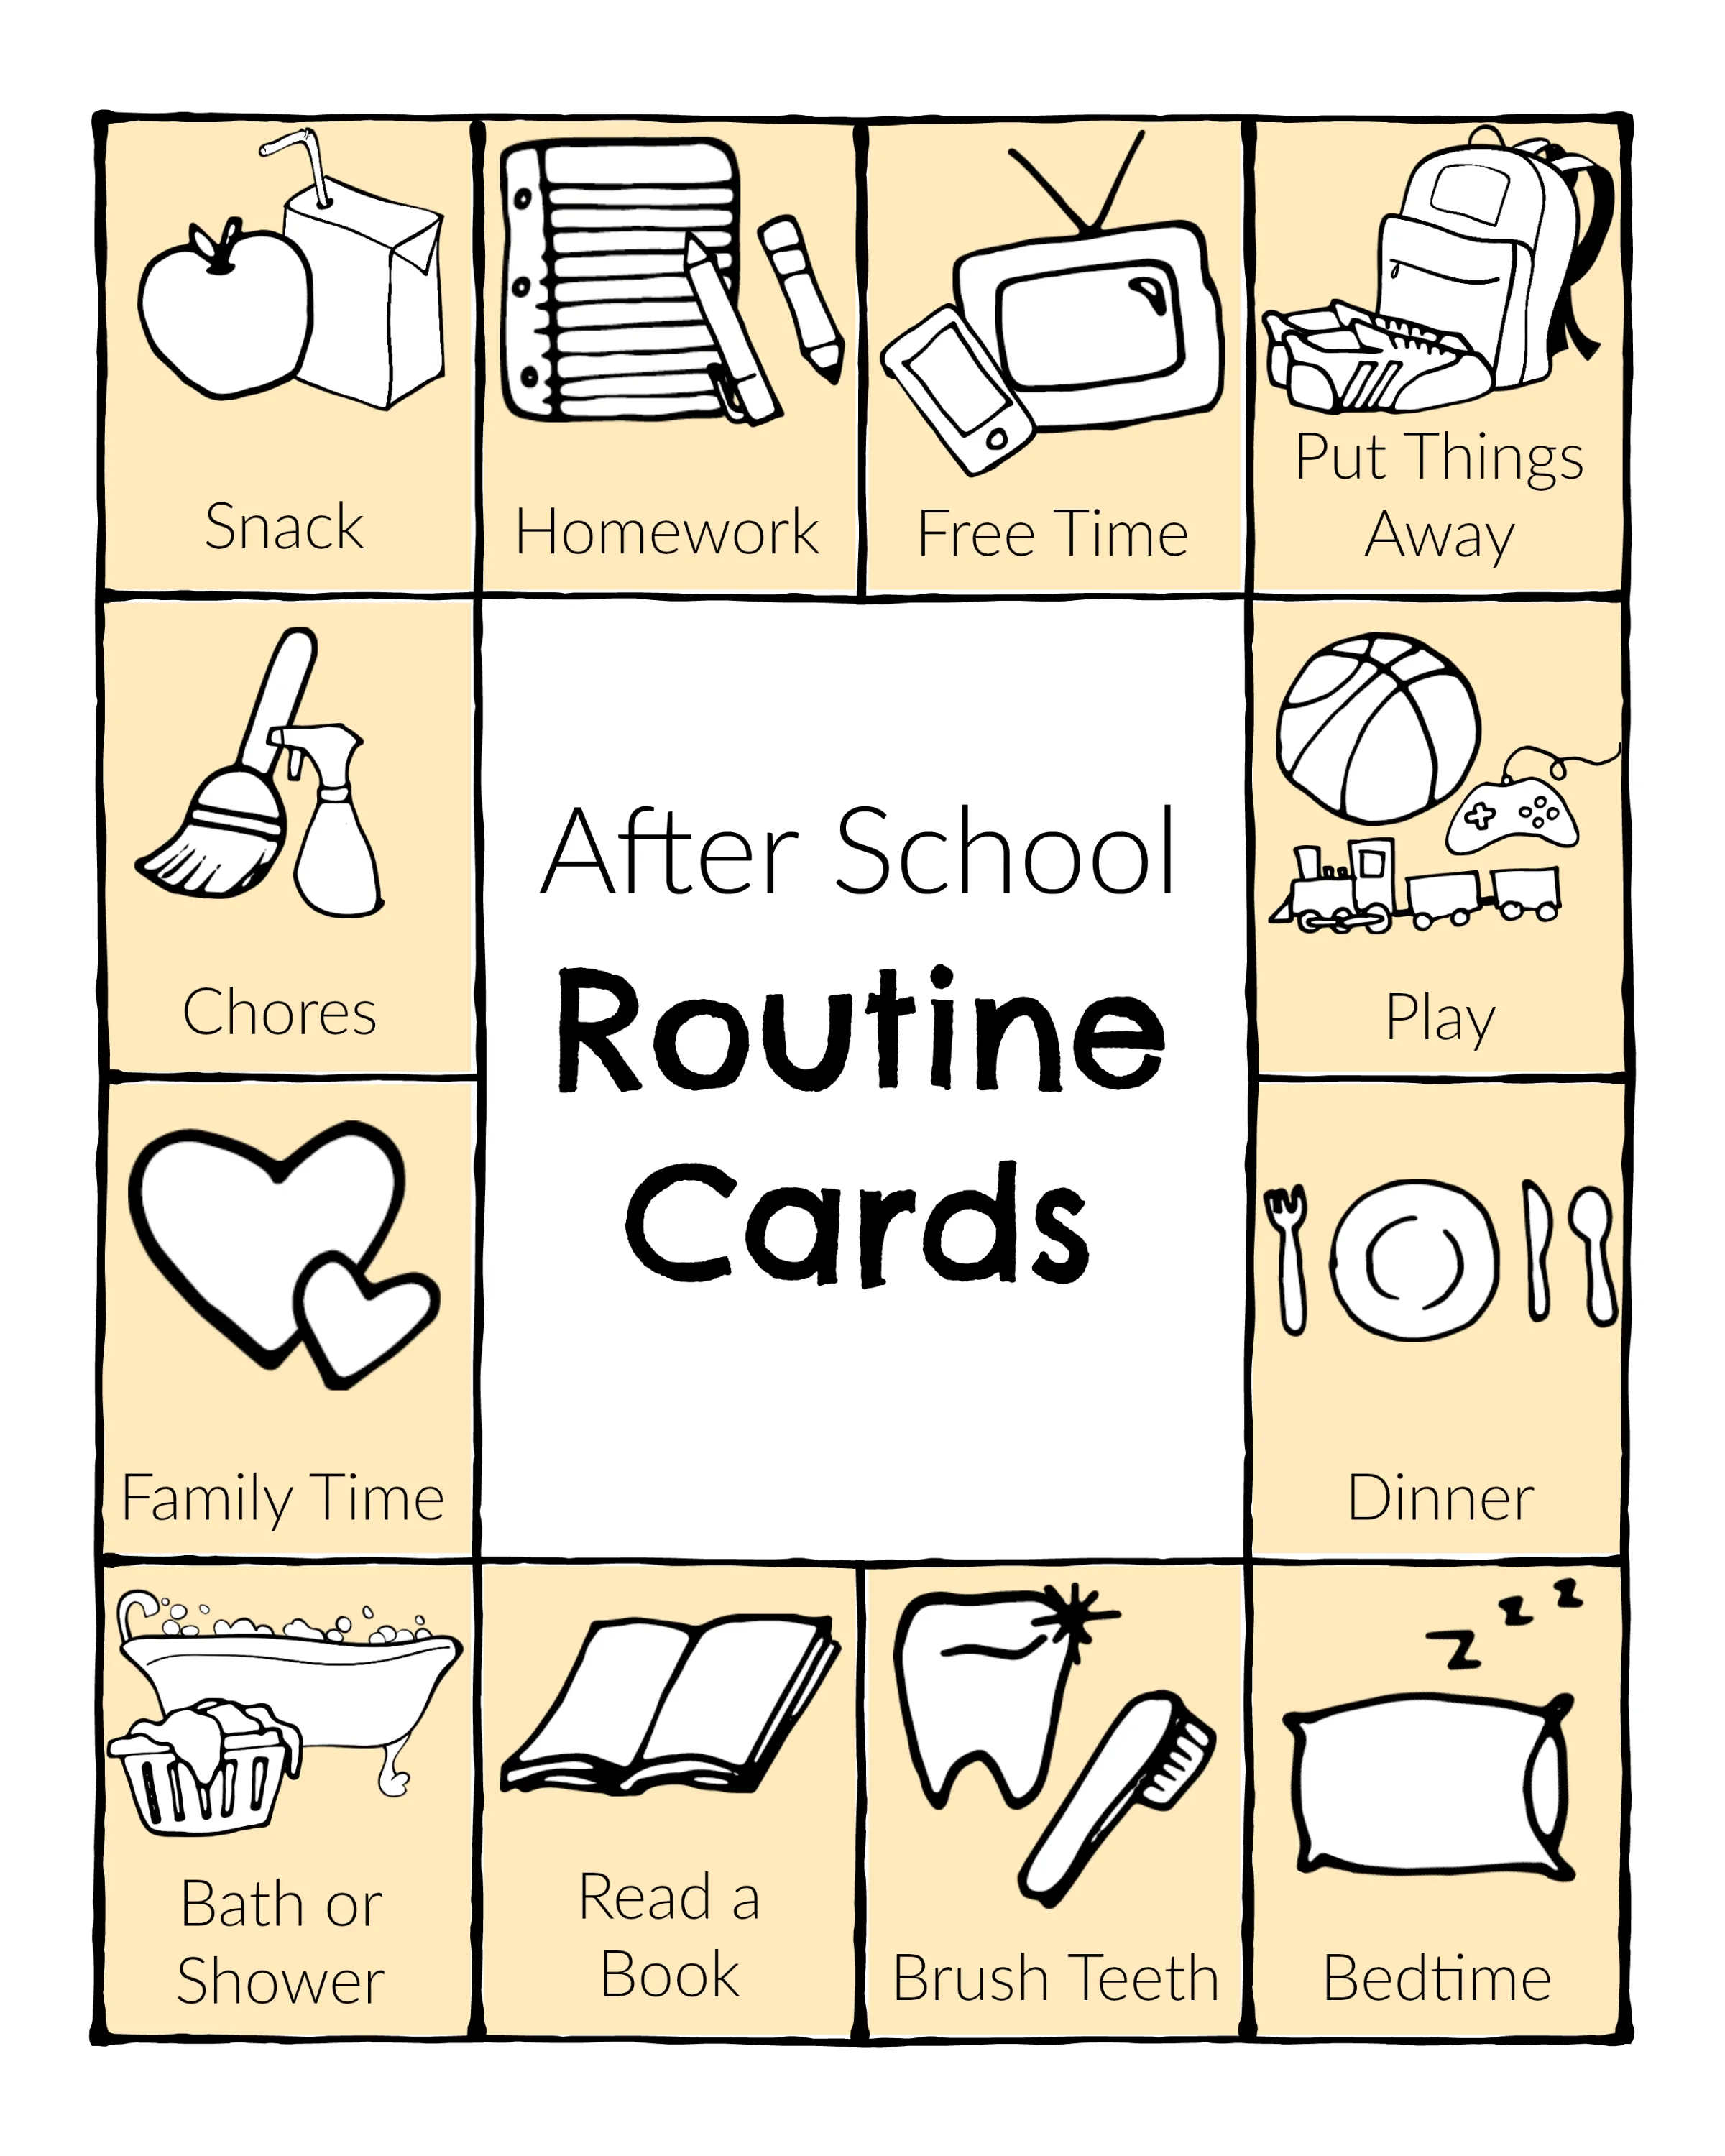 After School Routine Cards Printable